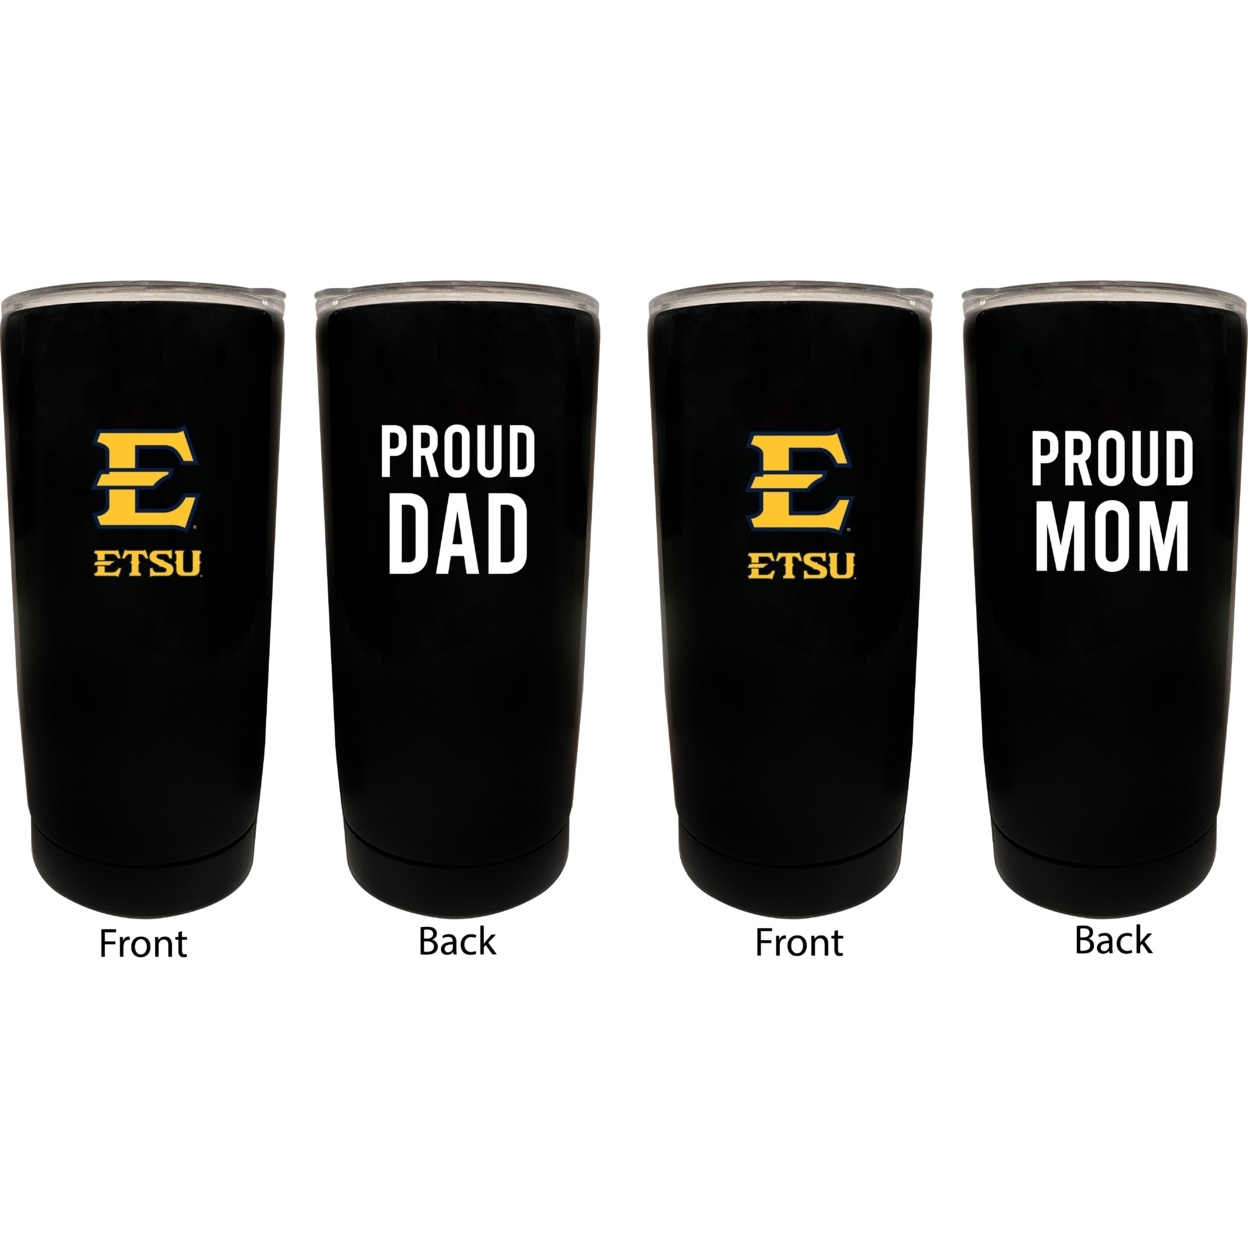 East Tennessee State University Proud Mom And Dad 16 Oz Insulated Stainless Steel Tumblers 2 Pack Black.